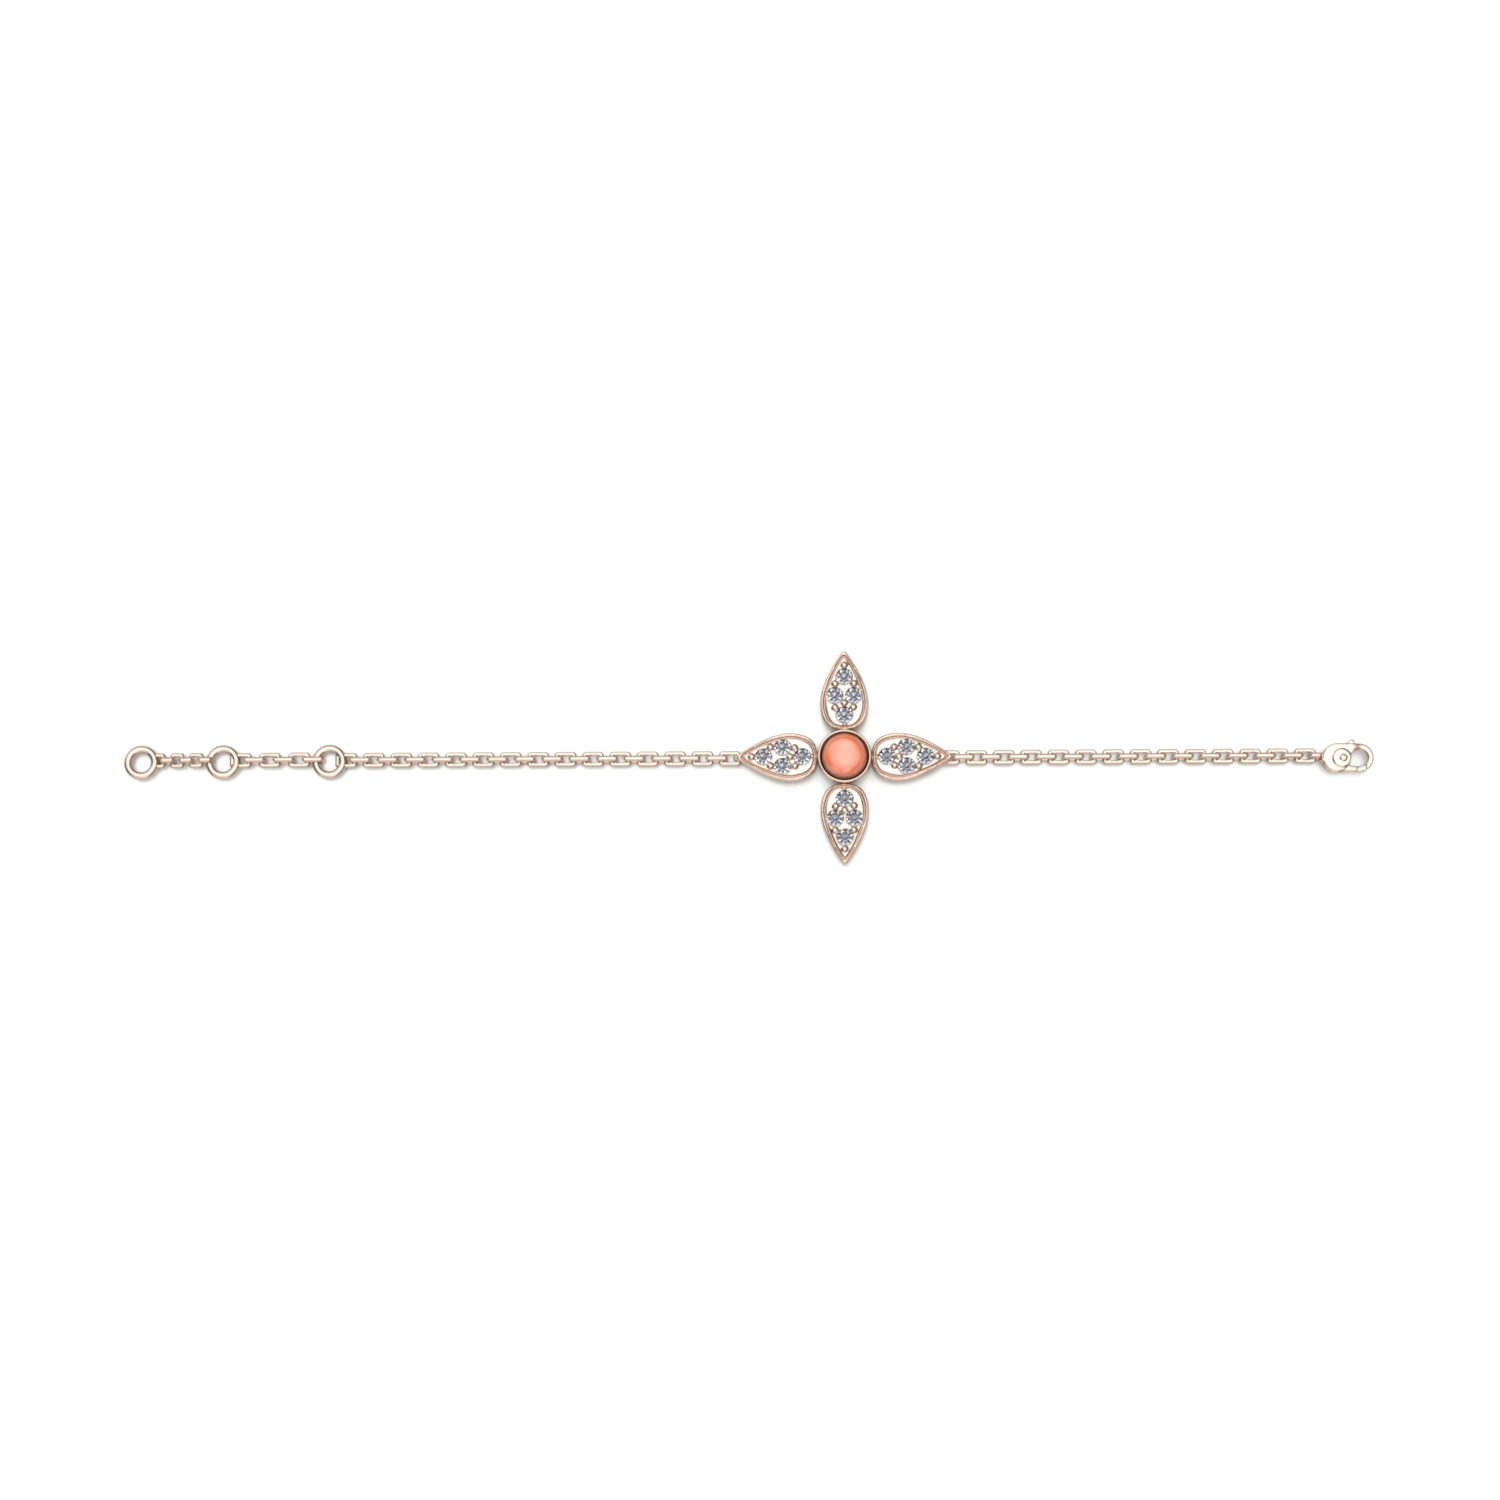 Color Blossom Bb Multi-motif Bracelet, Pink Gold, White Mother-of-pearl And  Diamonds | NiceMary